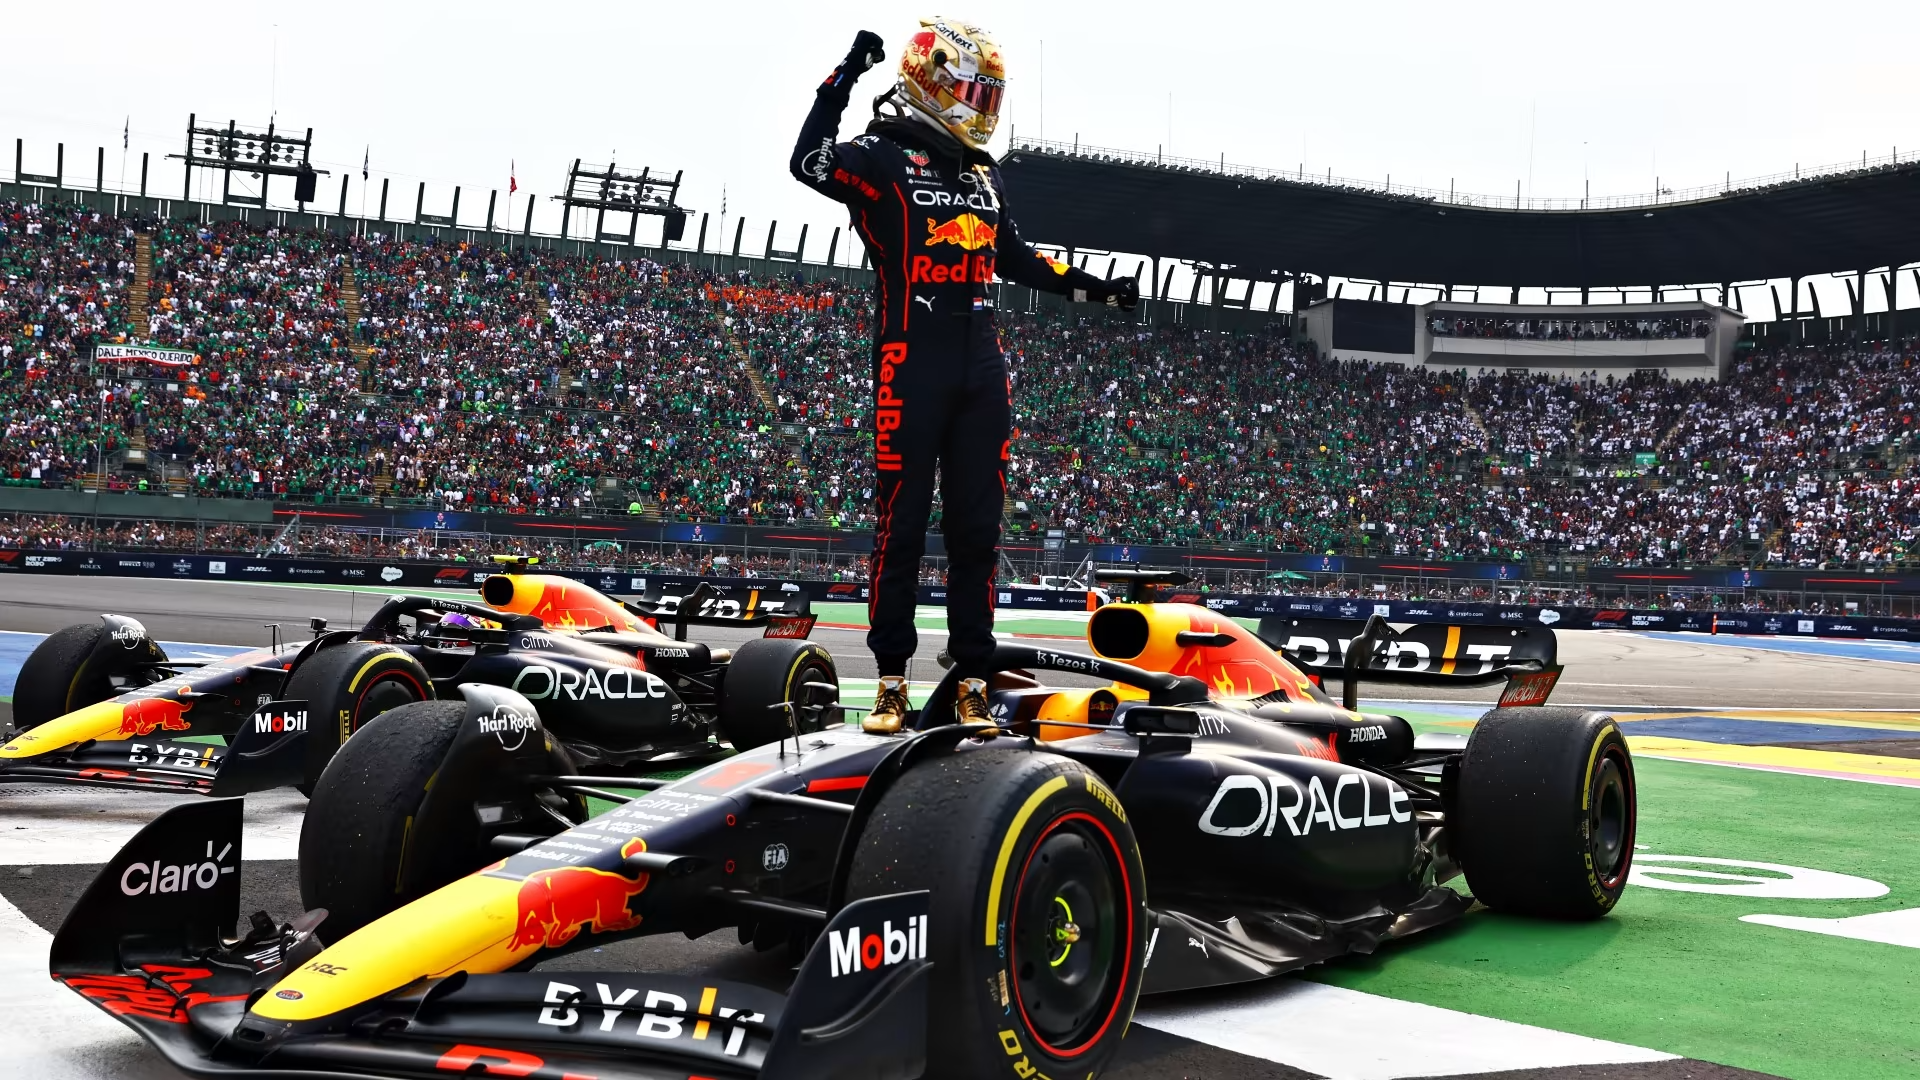 Verstappen Wins Monaco GP and Equals Vettel in Number of Wins for Red Bull